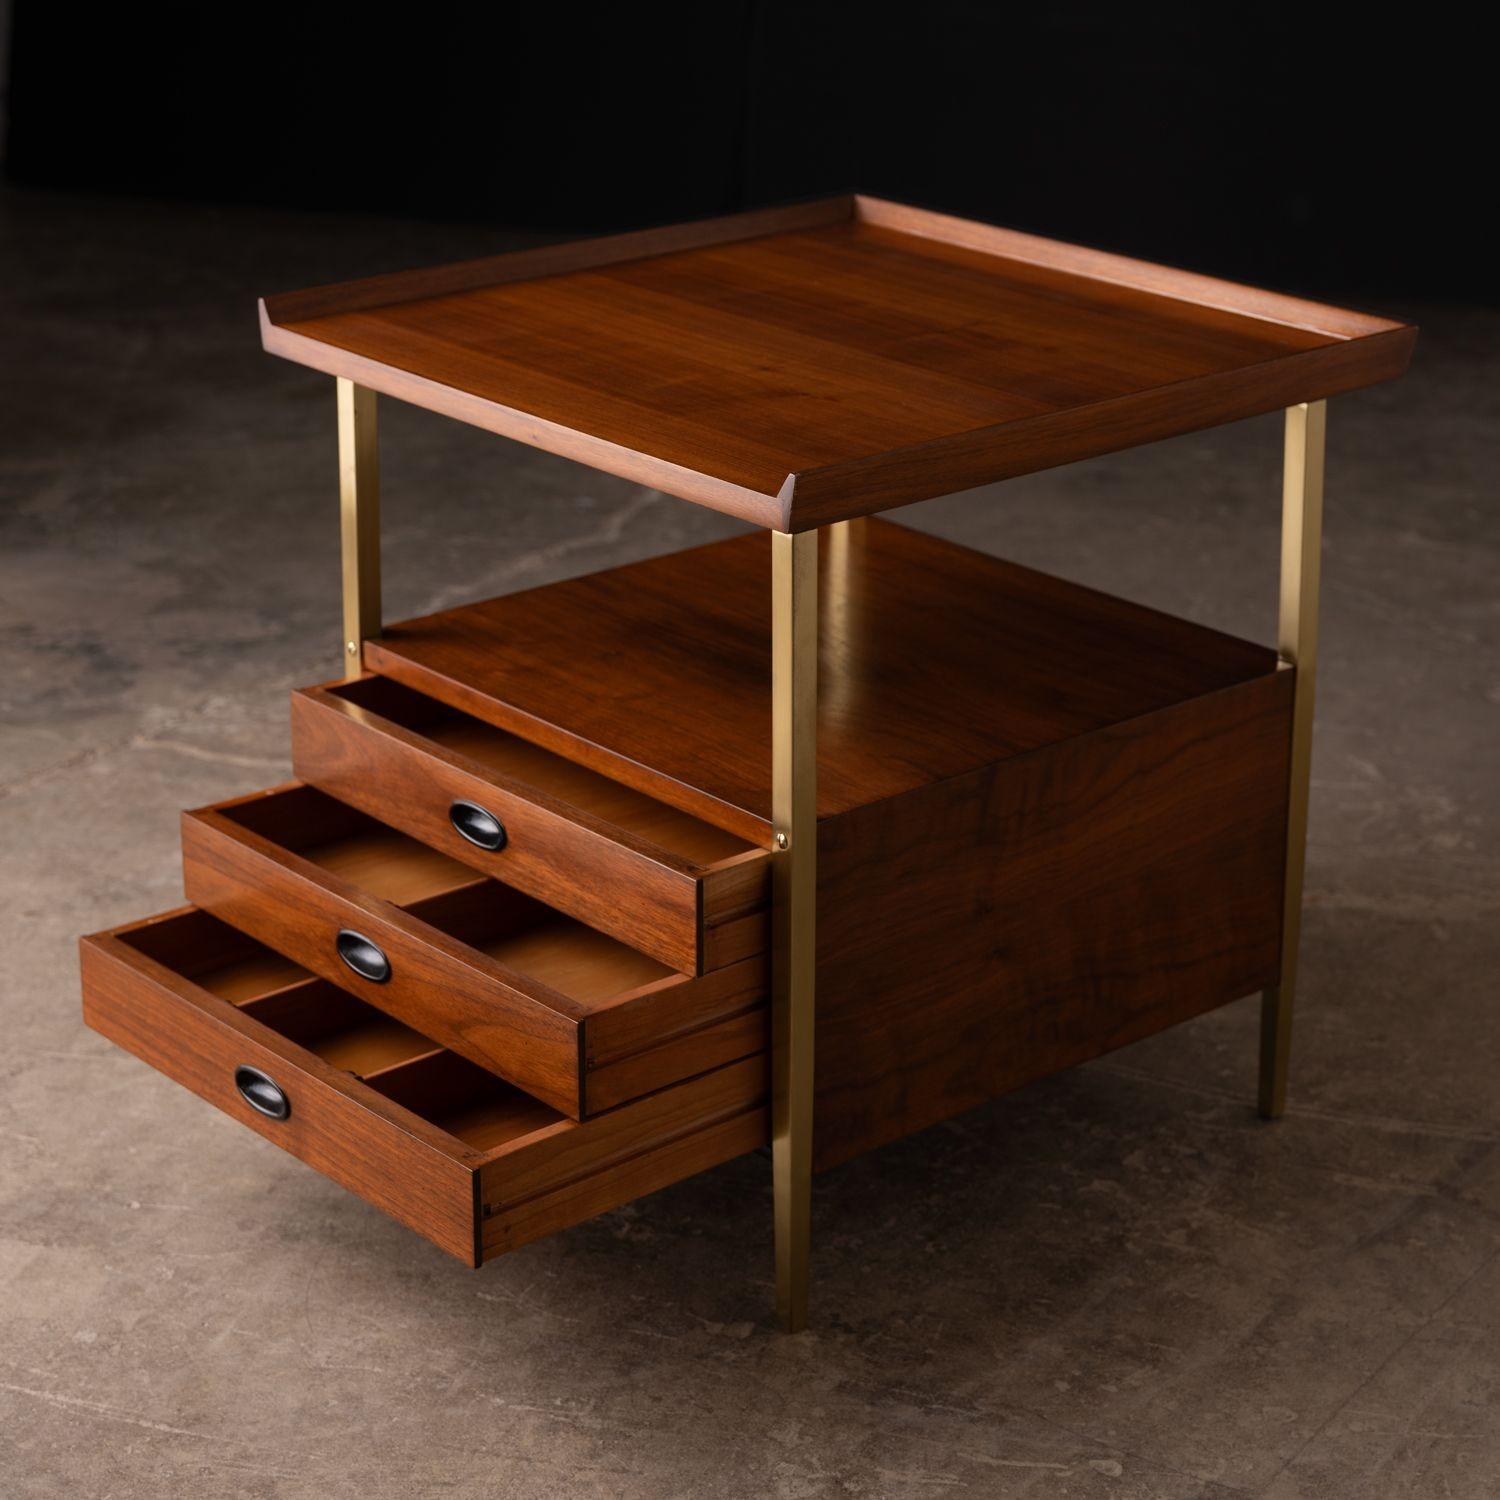 Pair of end tables / nightstands with three drawers designed by Milo Baughman for Arch Gordon. Constructed of walnut & solid brass, both tables have been professionally refinished and all of the solid brass legs have been removed, polished and